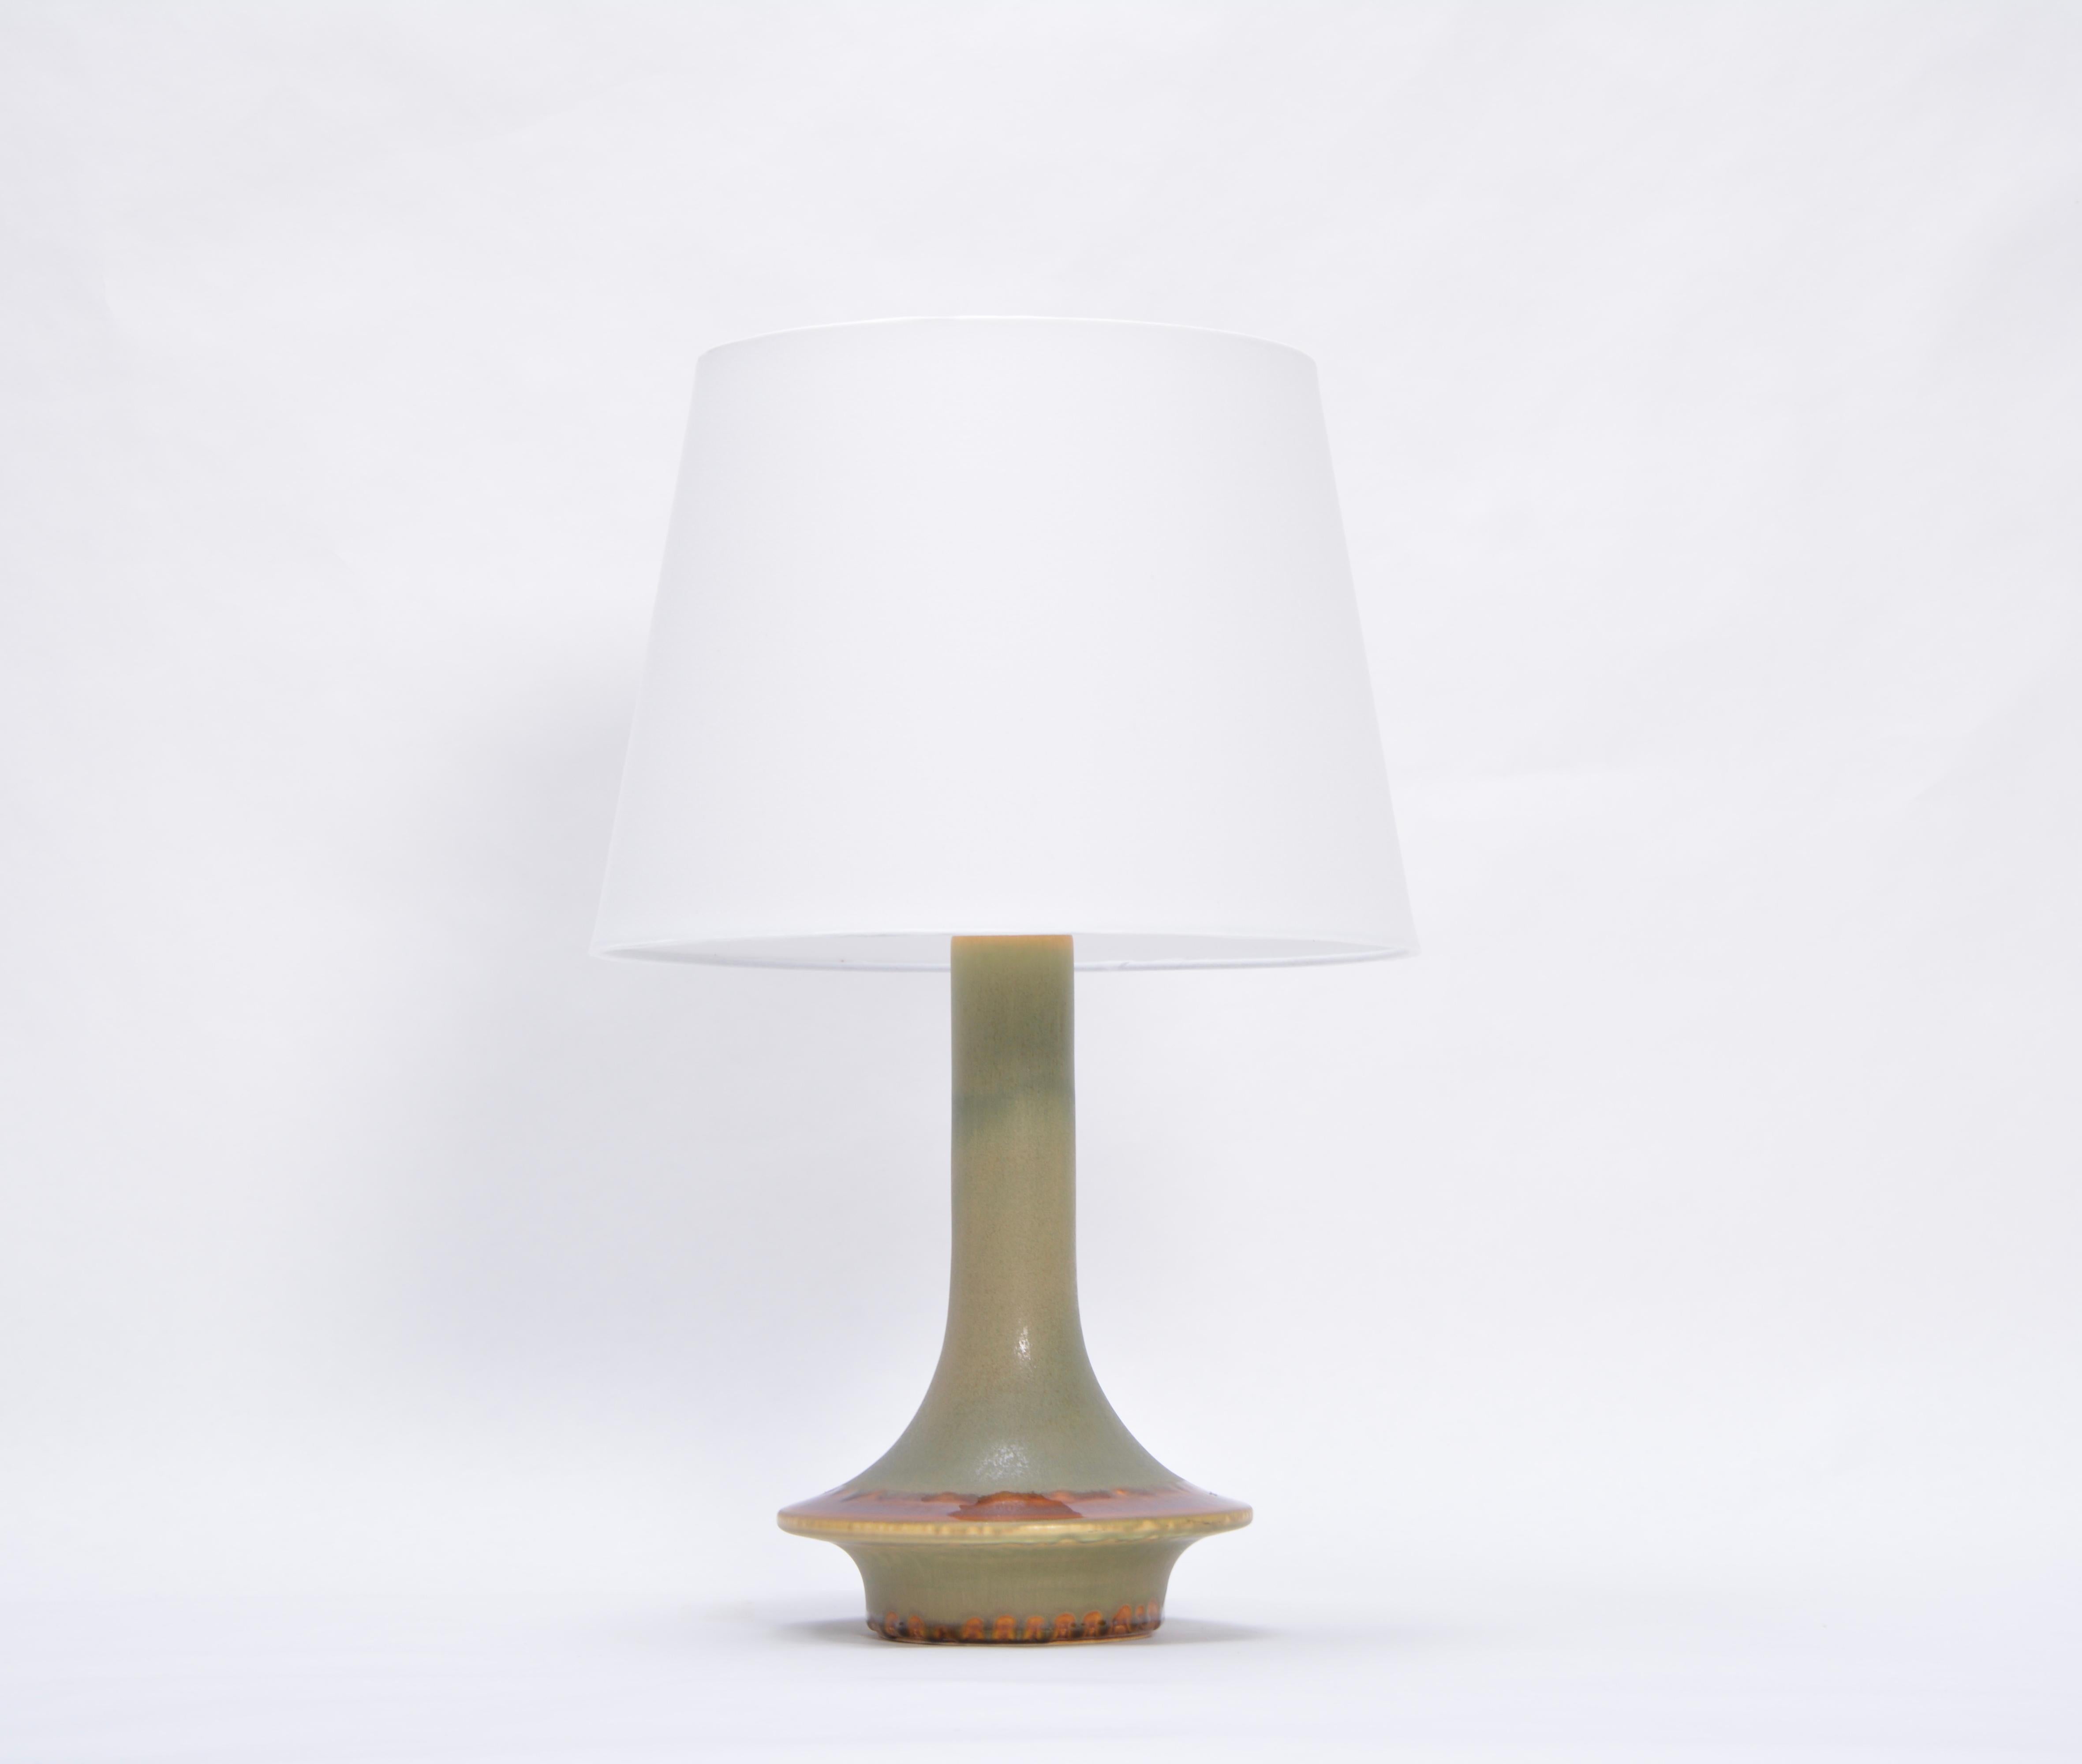 Danish Mid-Century Modern table lamp model 1068 by Soholm.

Stoneware table lamp with circular shaped base and long neck produced in Denmark by Soholm. Beautiful ceramic glazing in tones of brown and orange to the edge of the circular base. The